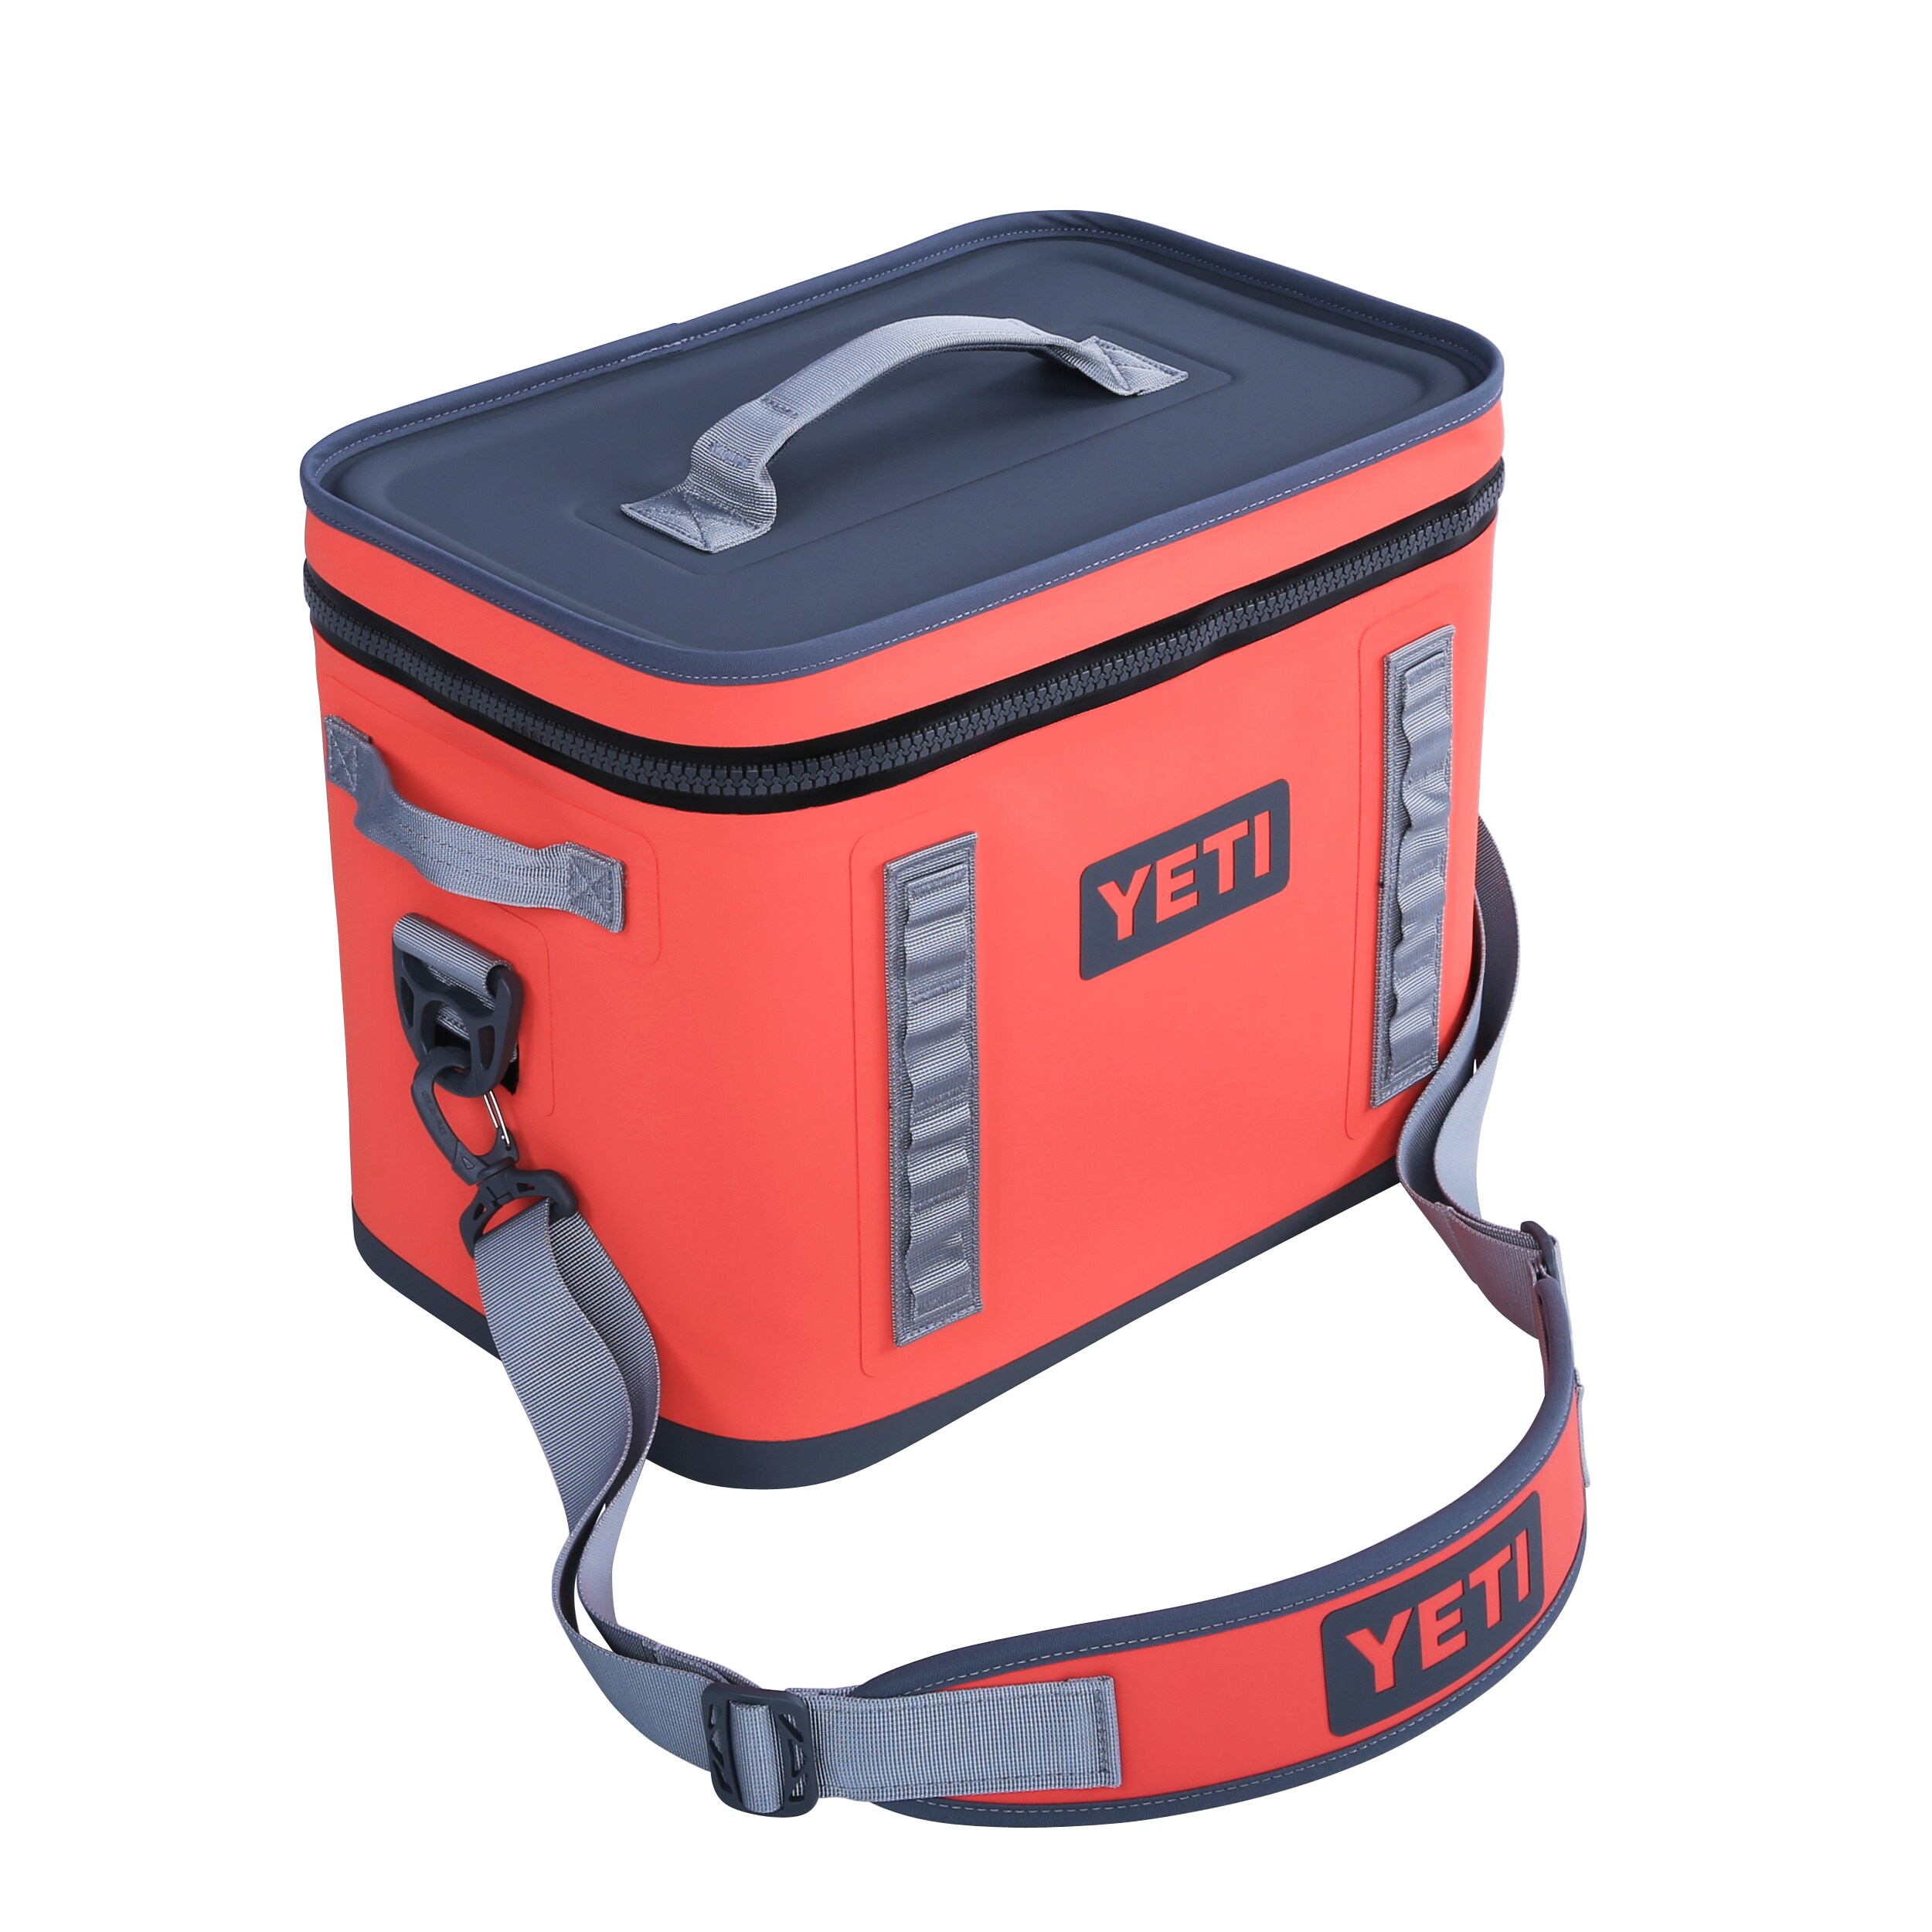 YETI Hopper Flip 18 Portable Cooler, Coral - Camping Coolers